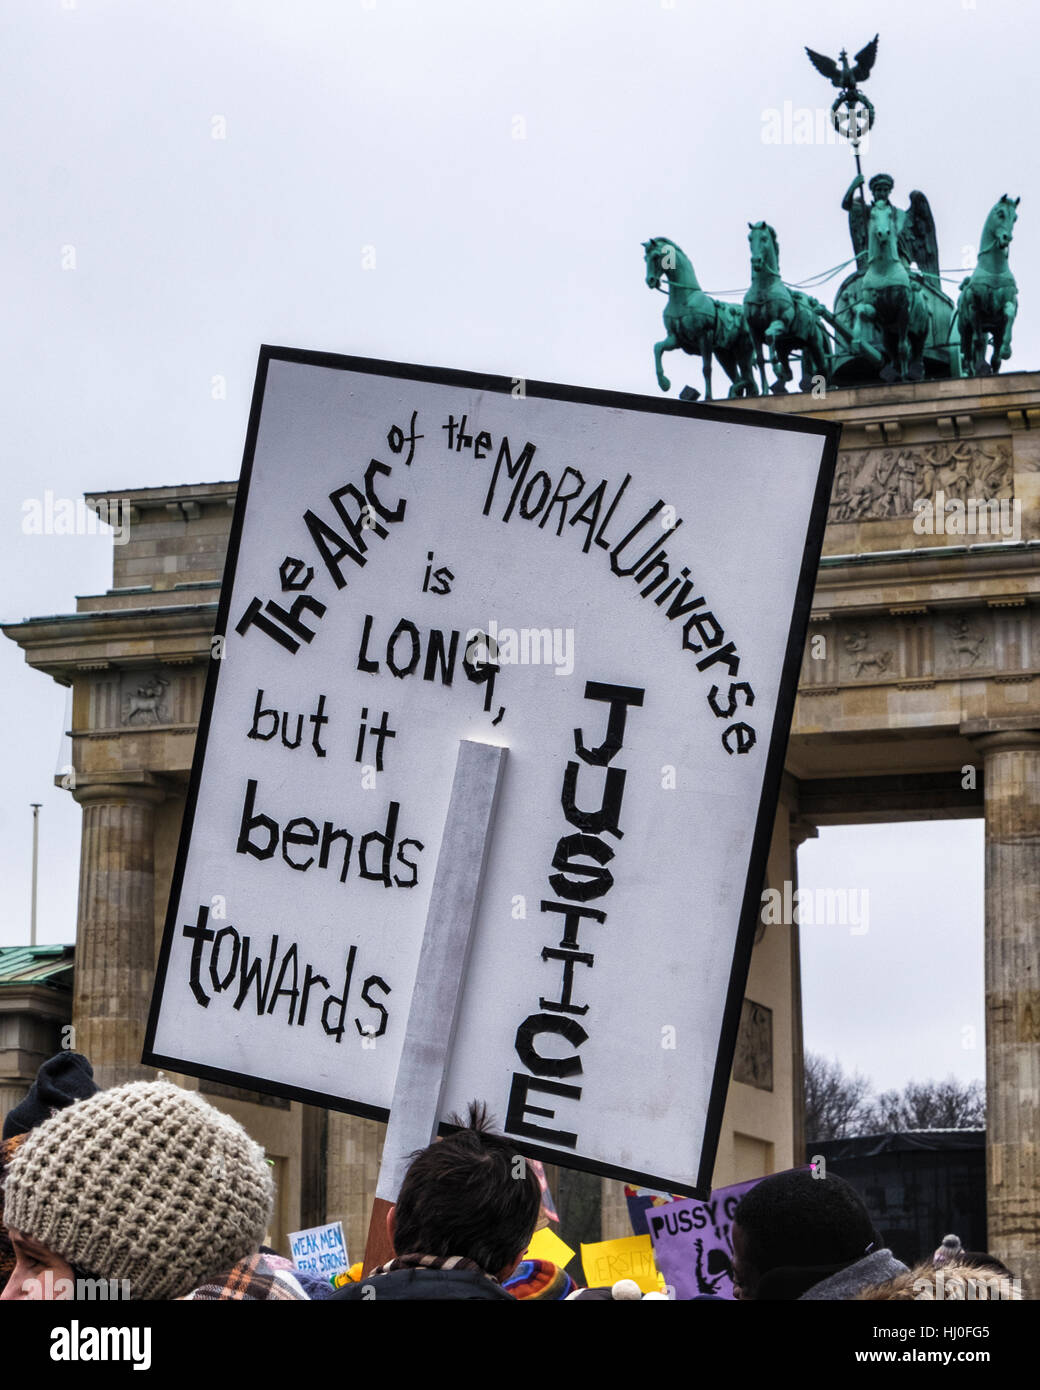 Berlin, Germany, 21st January 2017. Women, Men and Children gathered at the Pariser Platz outside the US Embassy today to protest against the newly inaugurated President, Donald Trump. Protests planned in London, Berlin, Oslo, Toronto and other cities around the world, will express the fear that Donald Trump poses a threat to human and civil rights. Eden Breitz/Alamy Live News Stock Photo